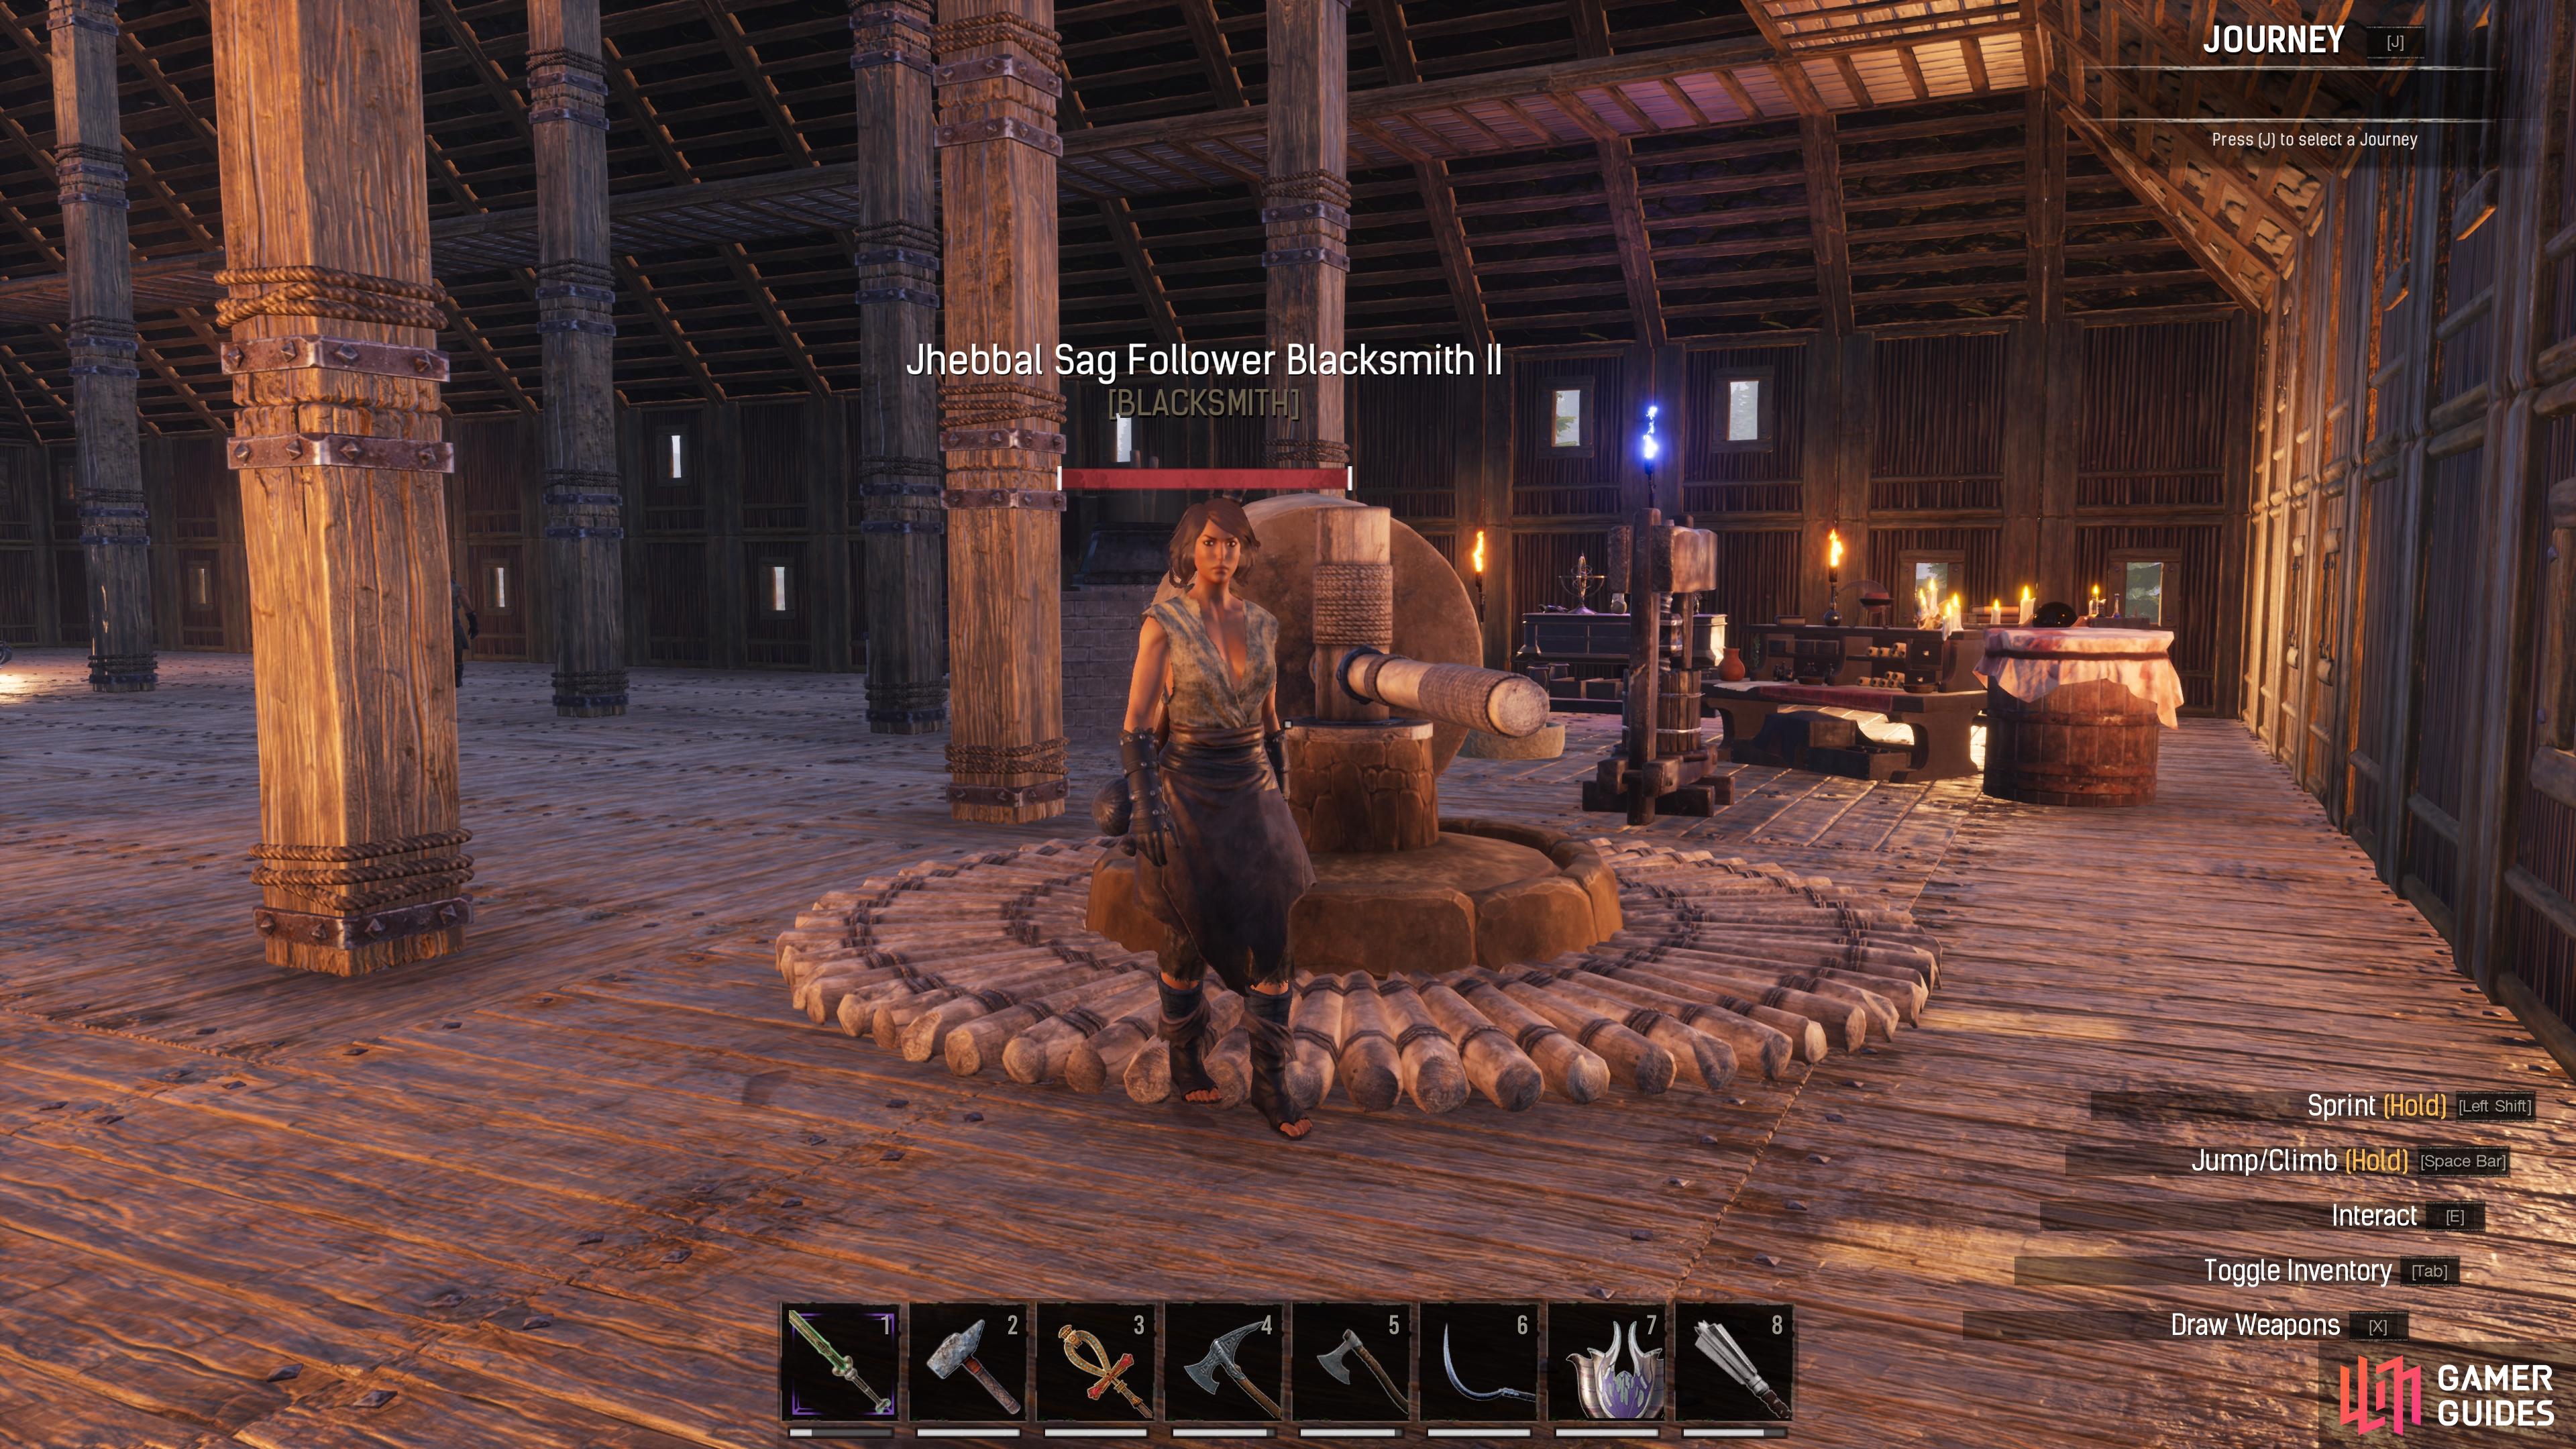 Everyone can use the help of some handy crafting thralls in their Conan Exiles base.